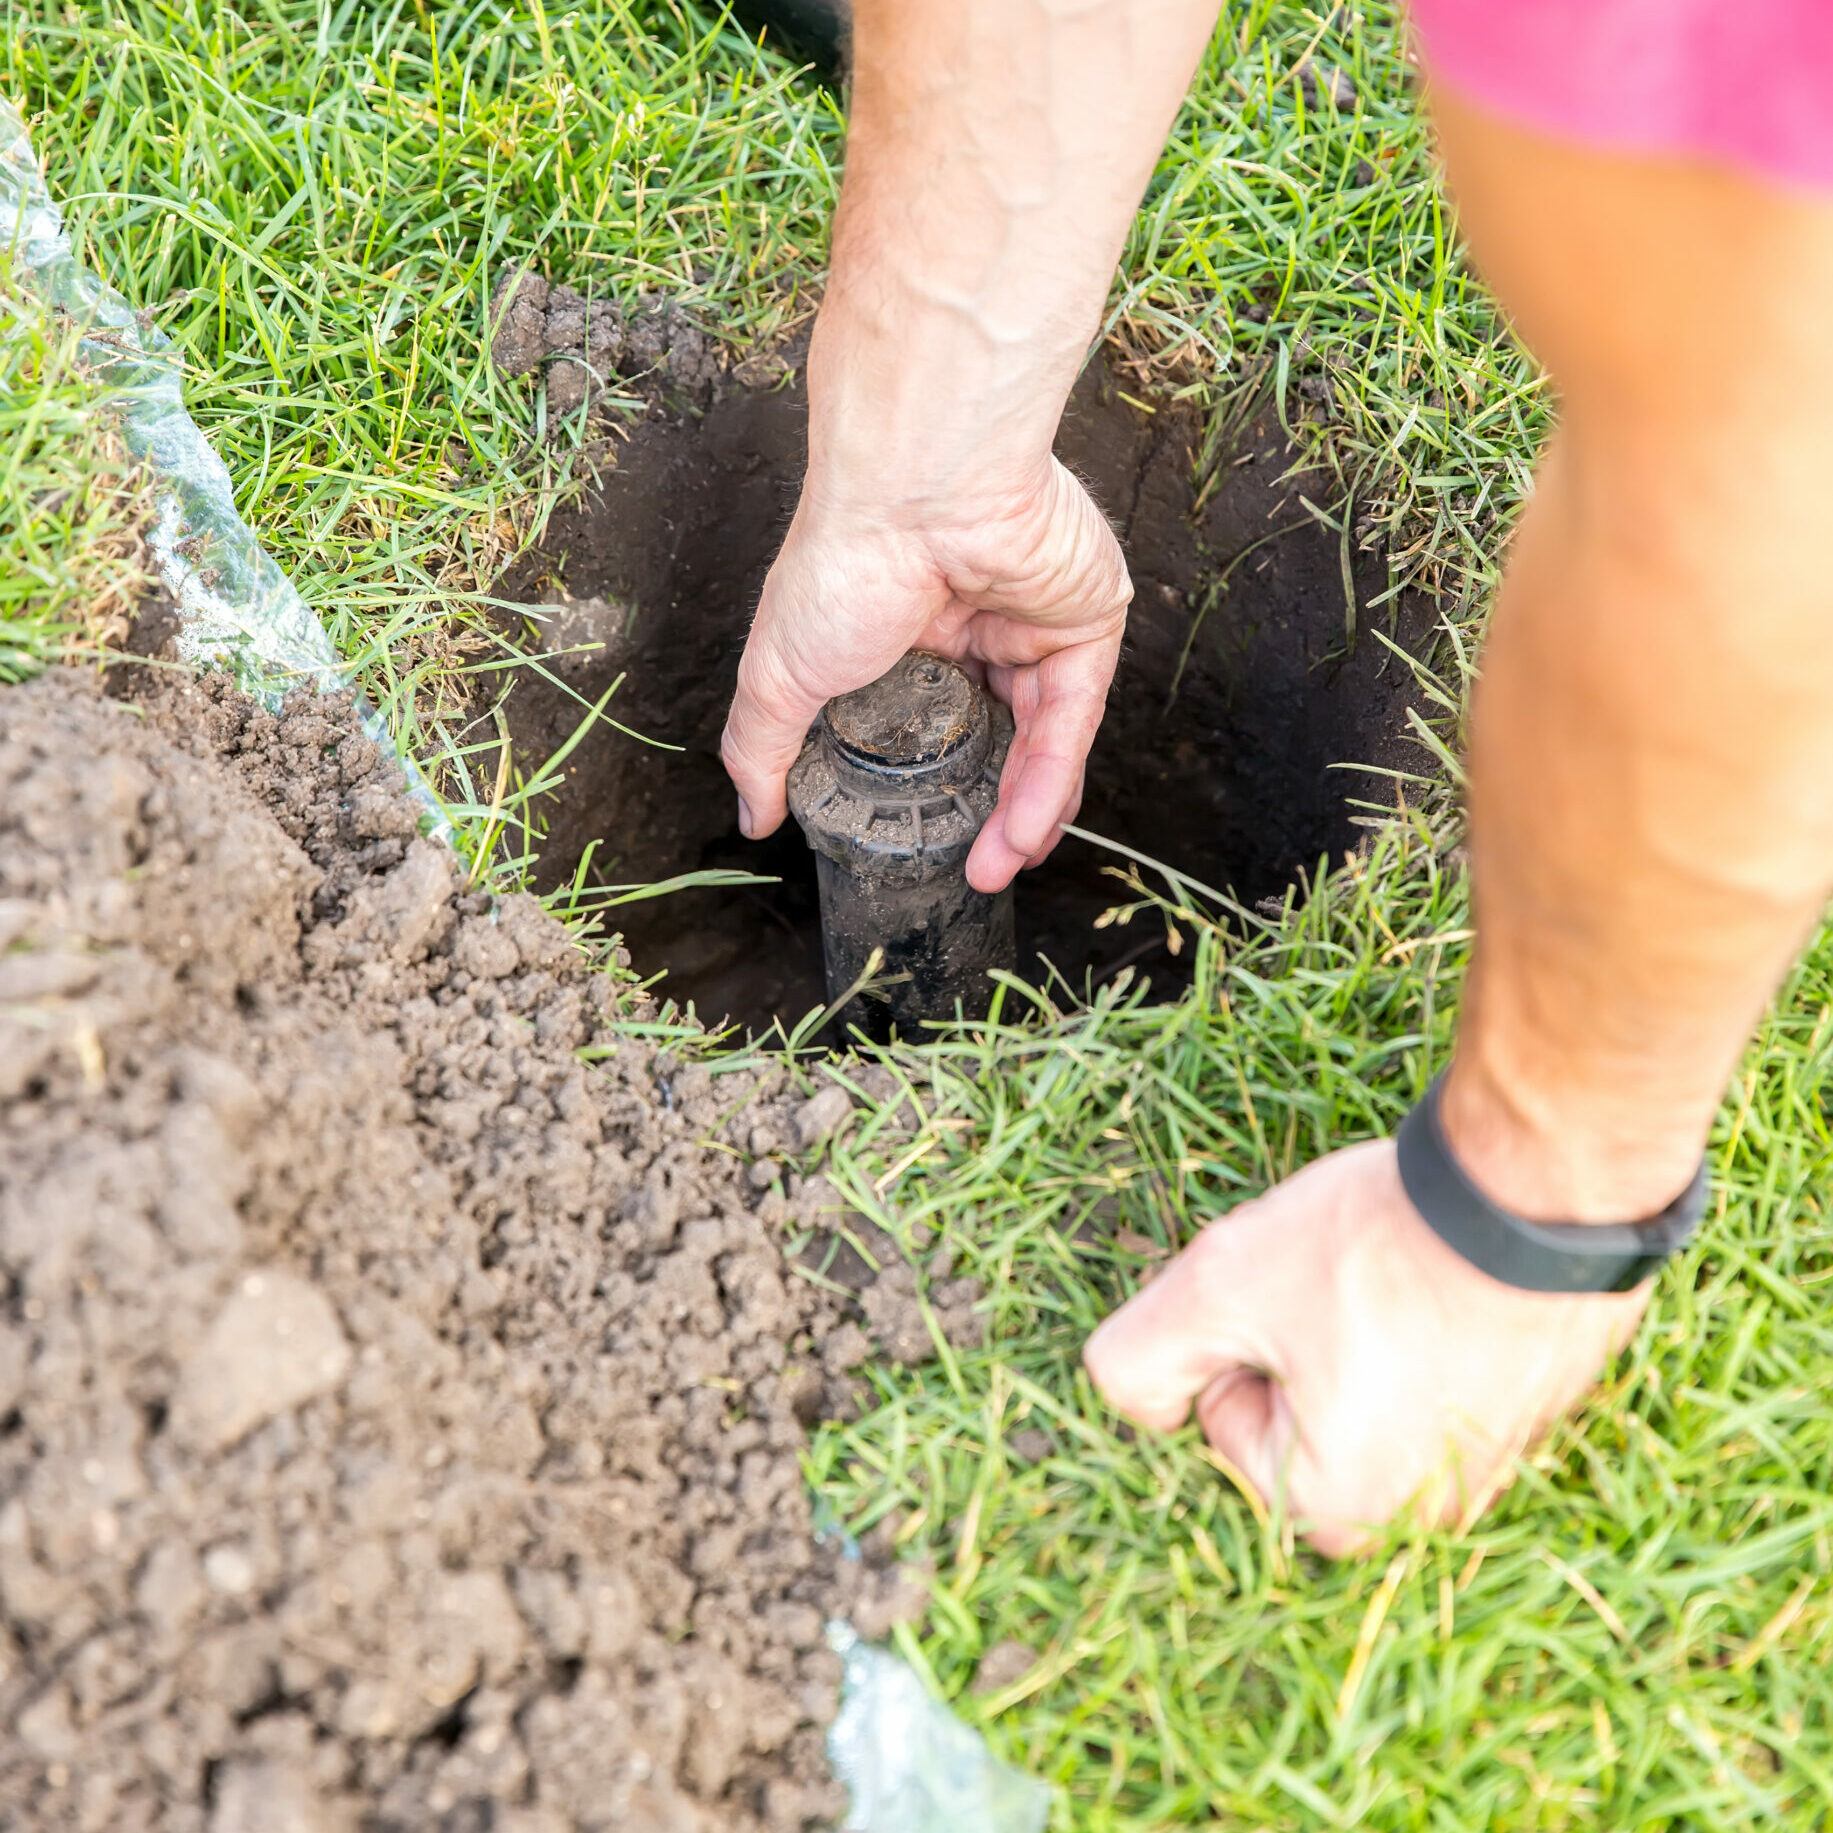 Close-up of a man's hands as he replaces an in-ground sprinkler head. In this image he is taking out the old sprinkler head and has a new one laying on the ground near the top of the image.